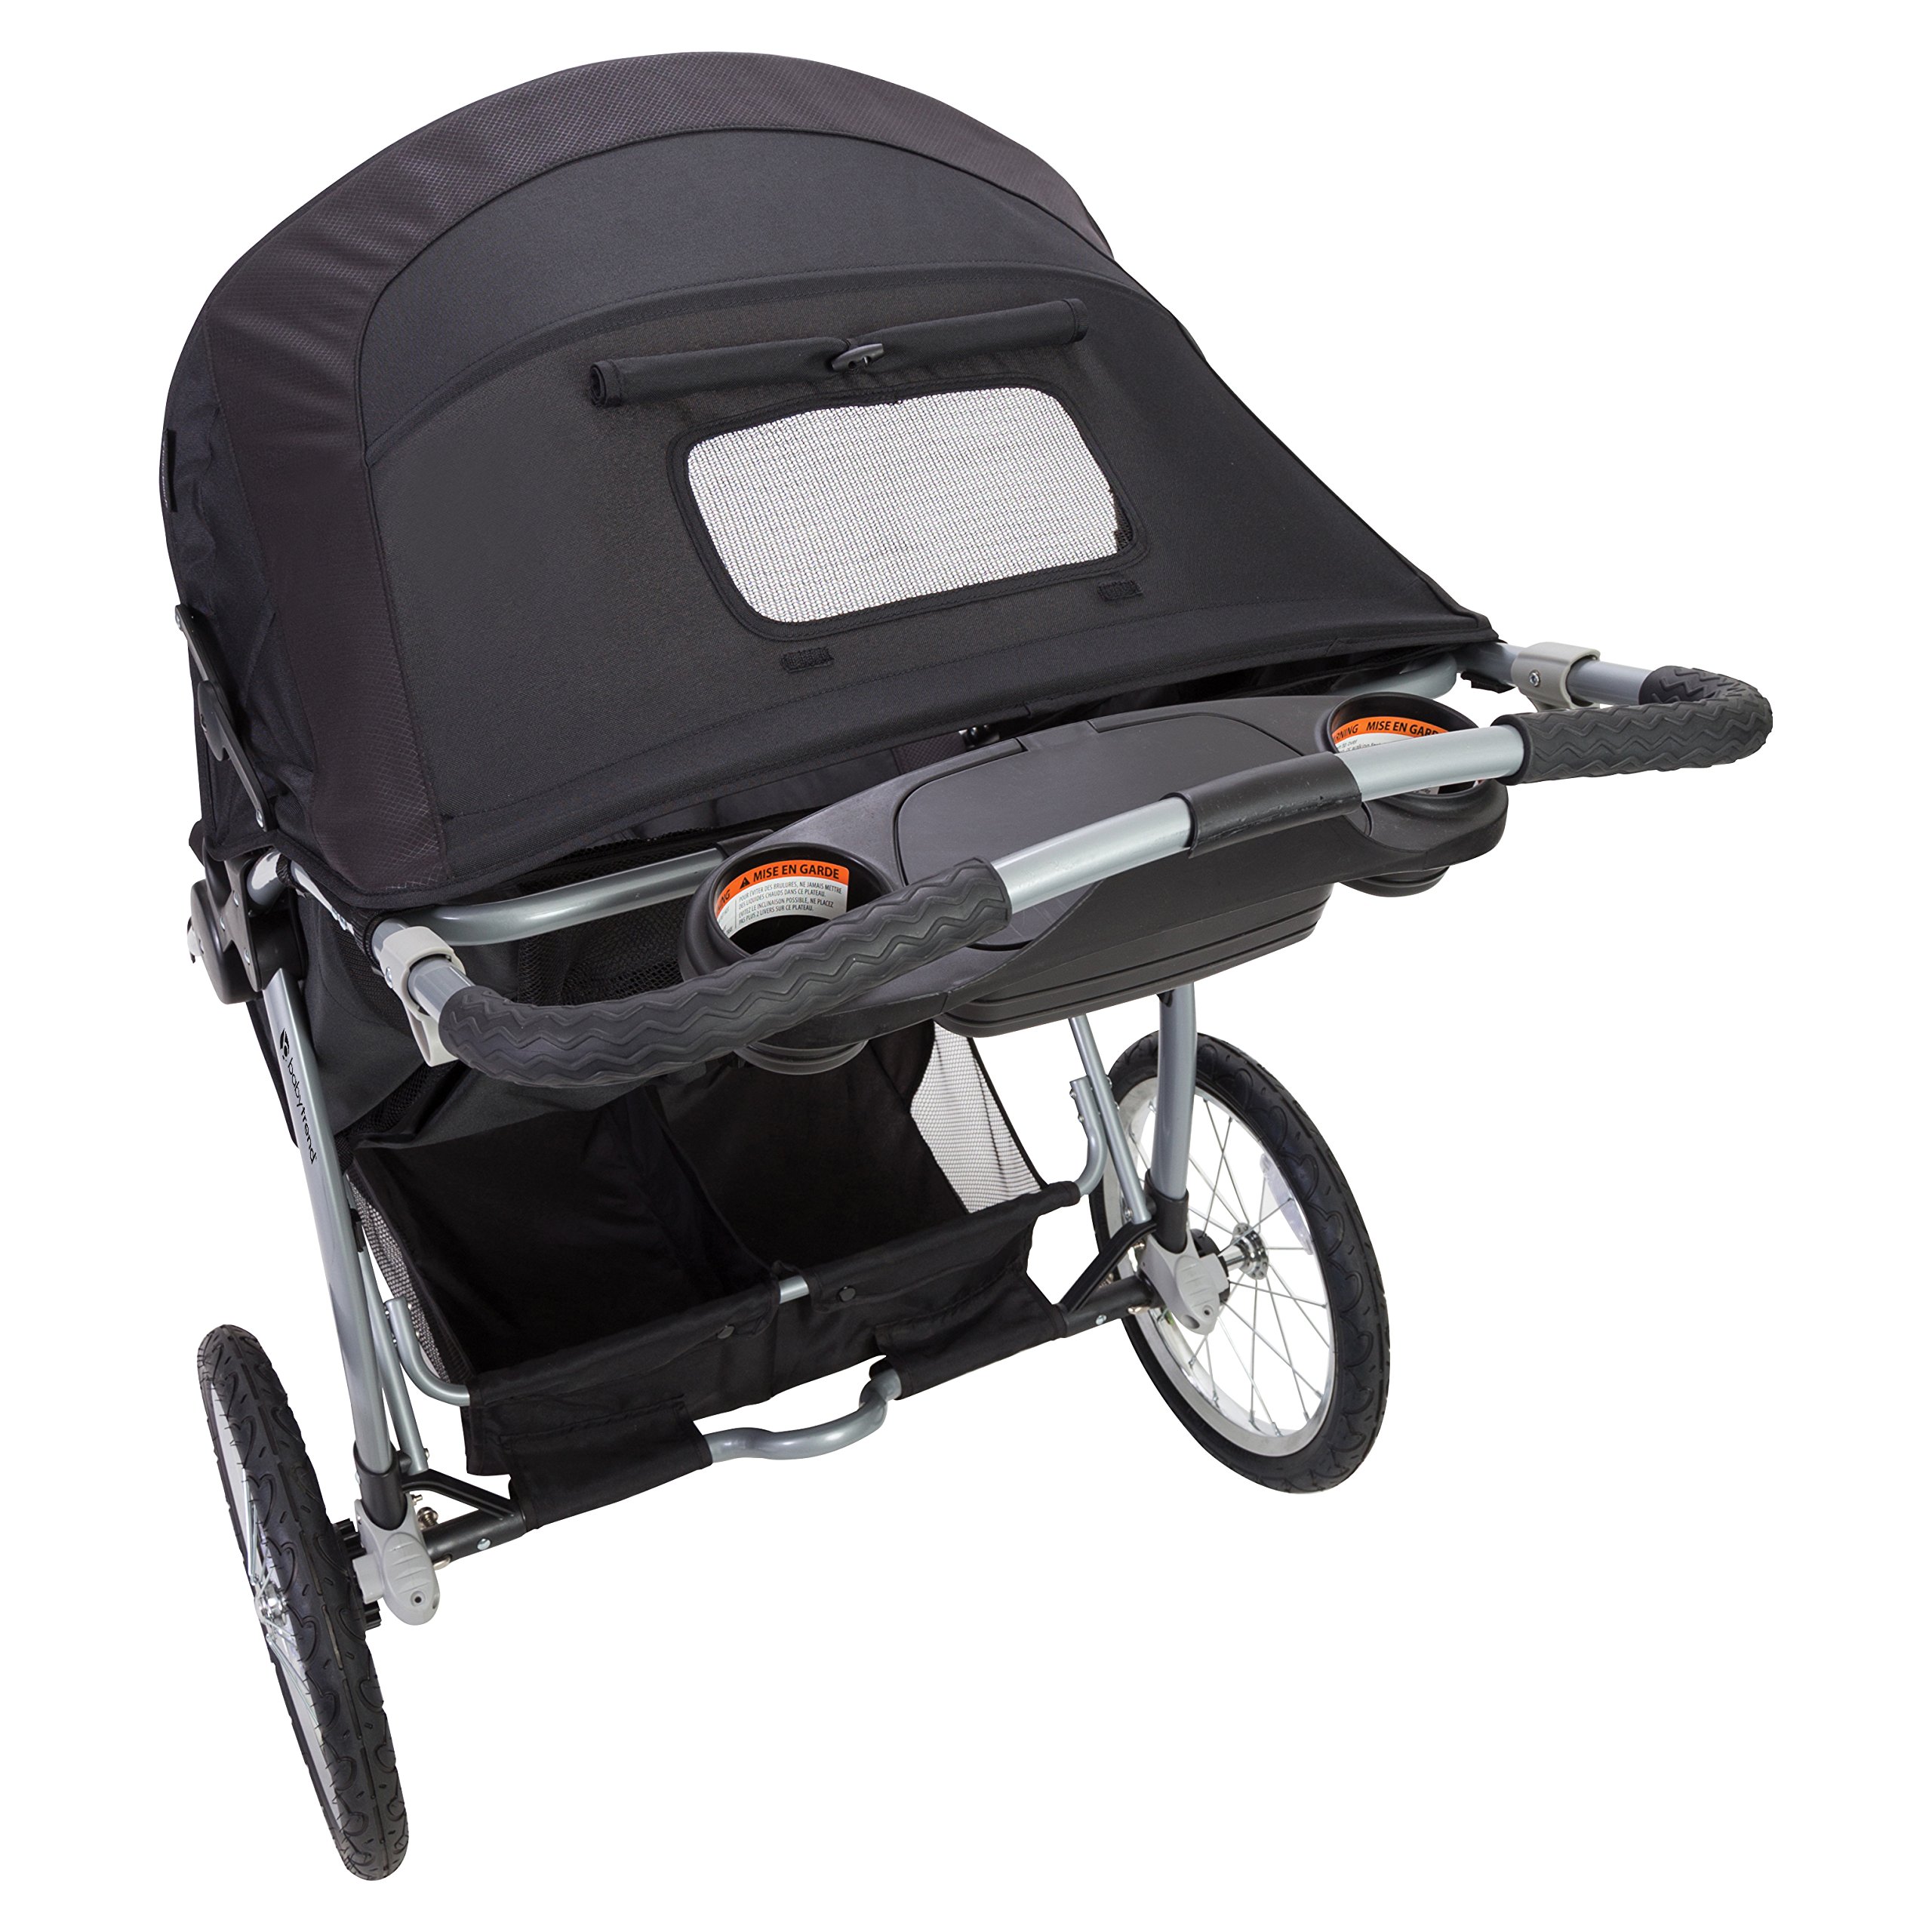 Baby Trend Expedition Double Jogger, Griffin